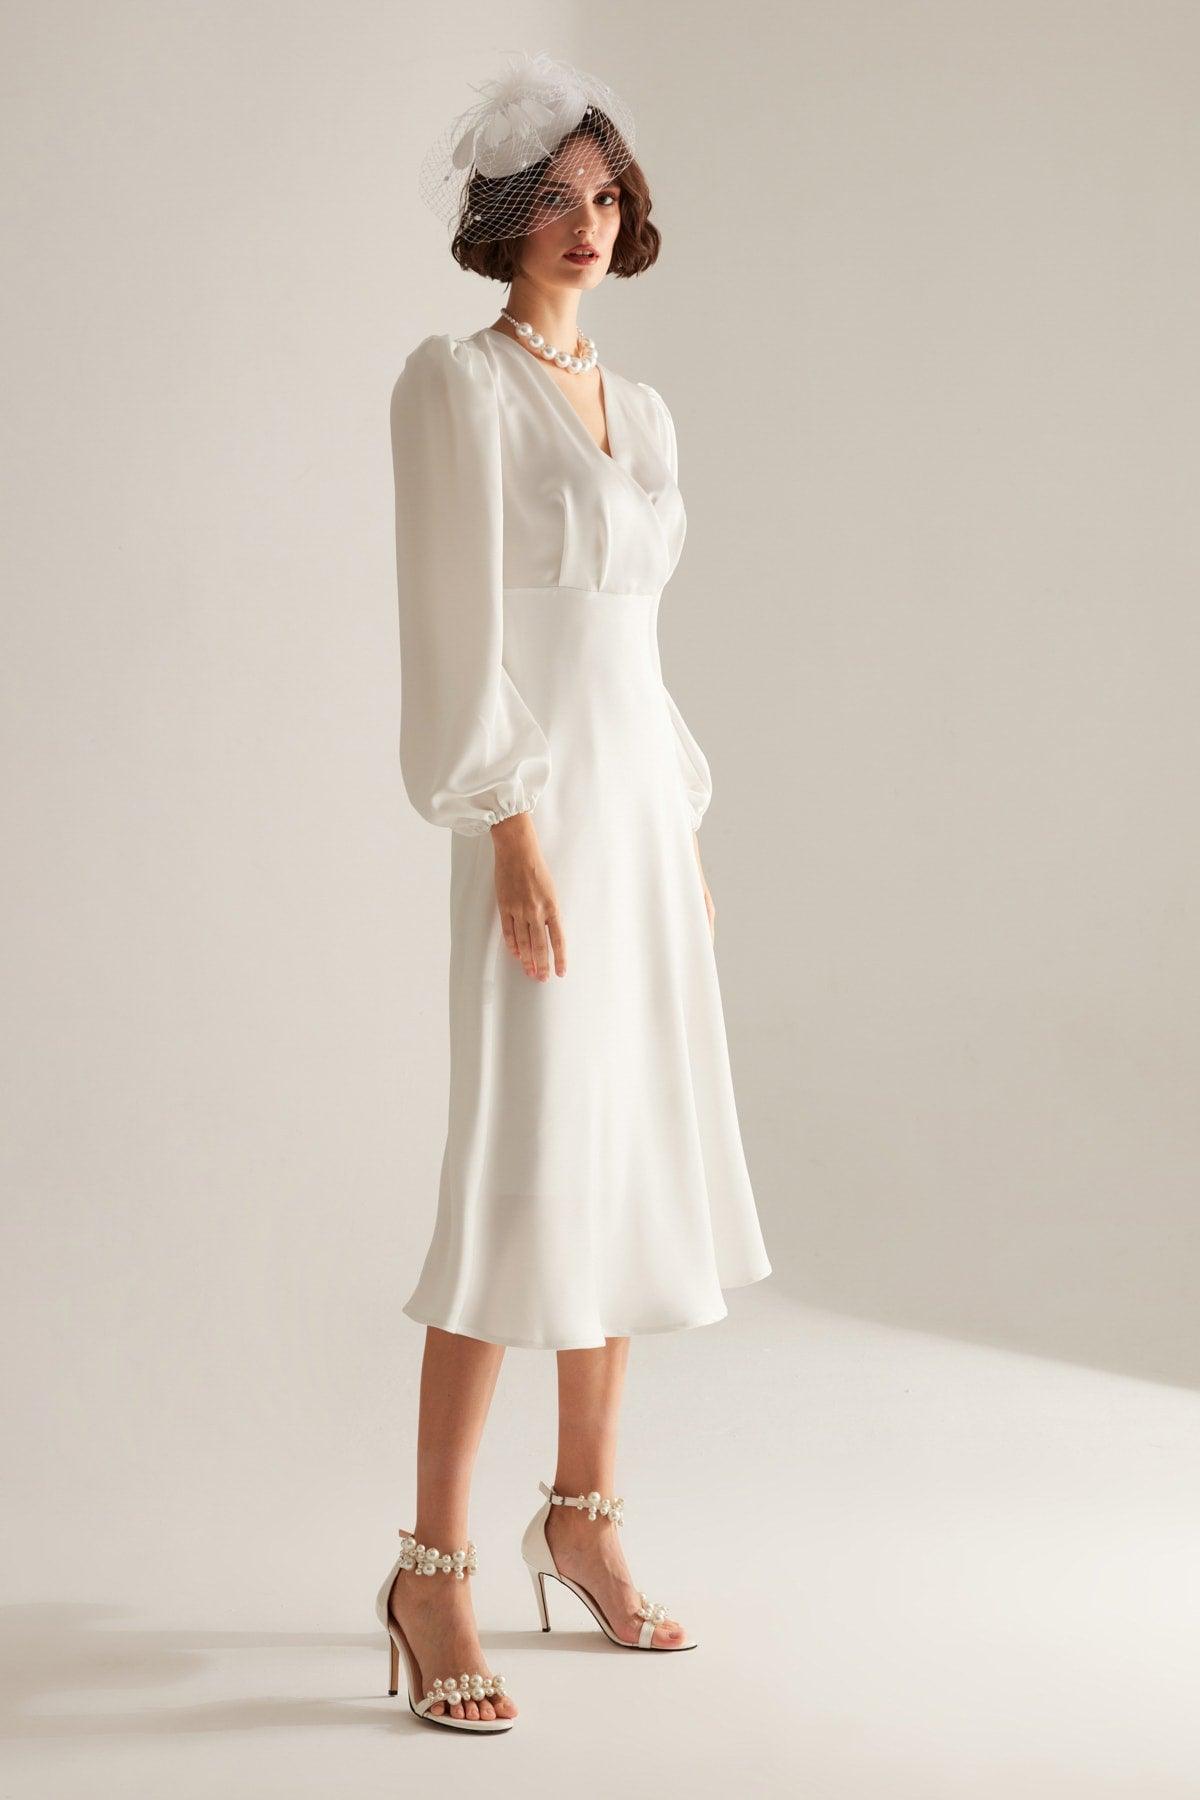 Merry White Double Breasted Collar Flared Dress - Swordslife